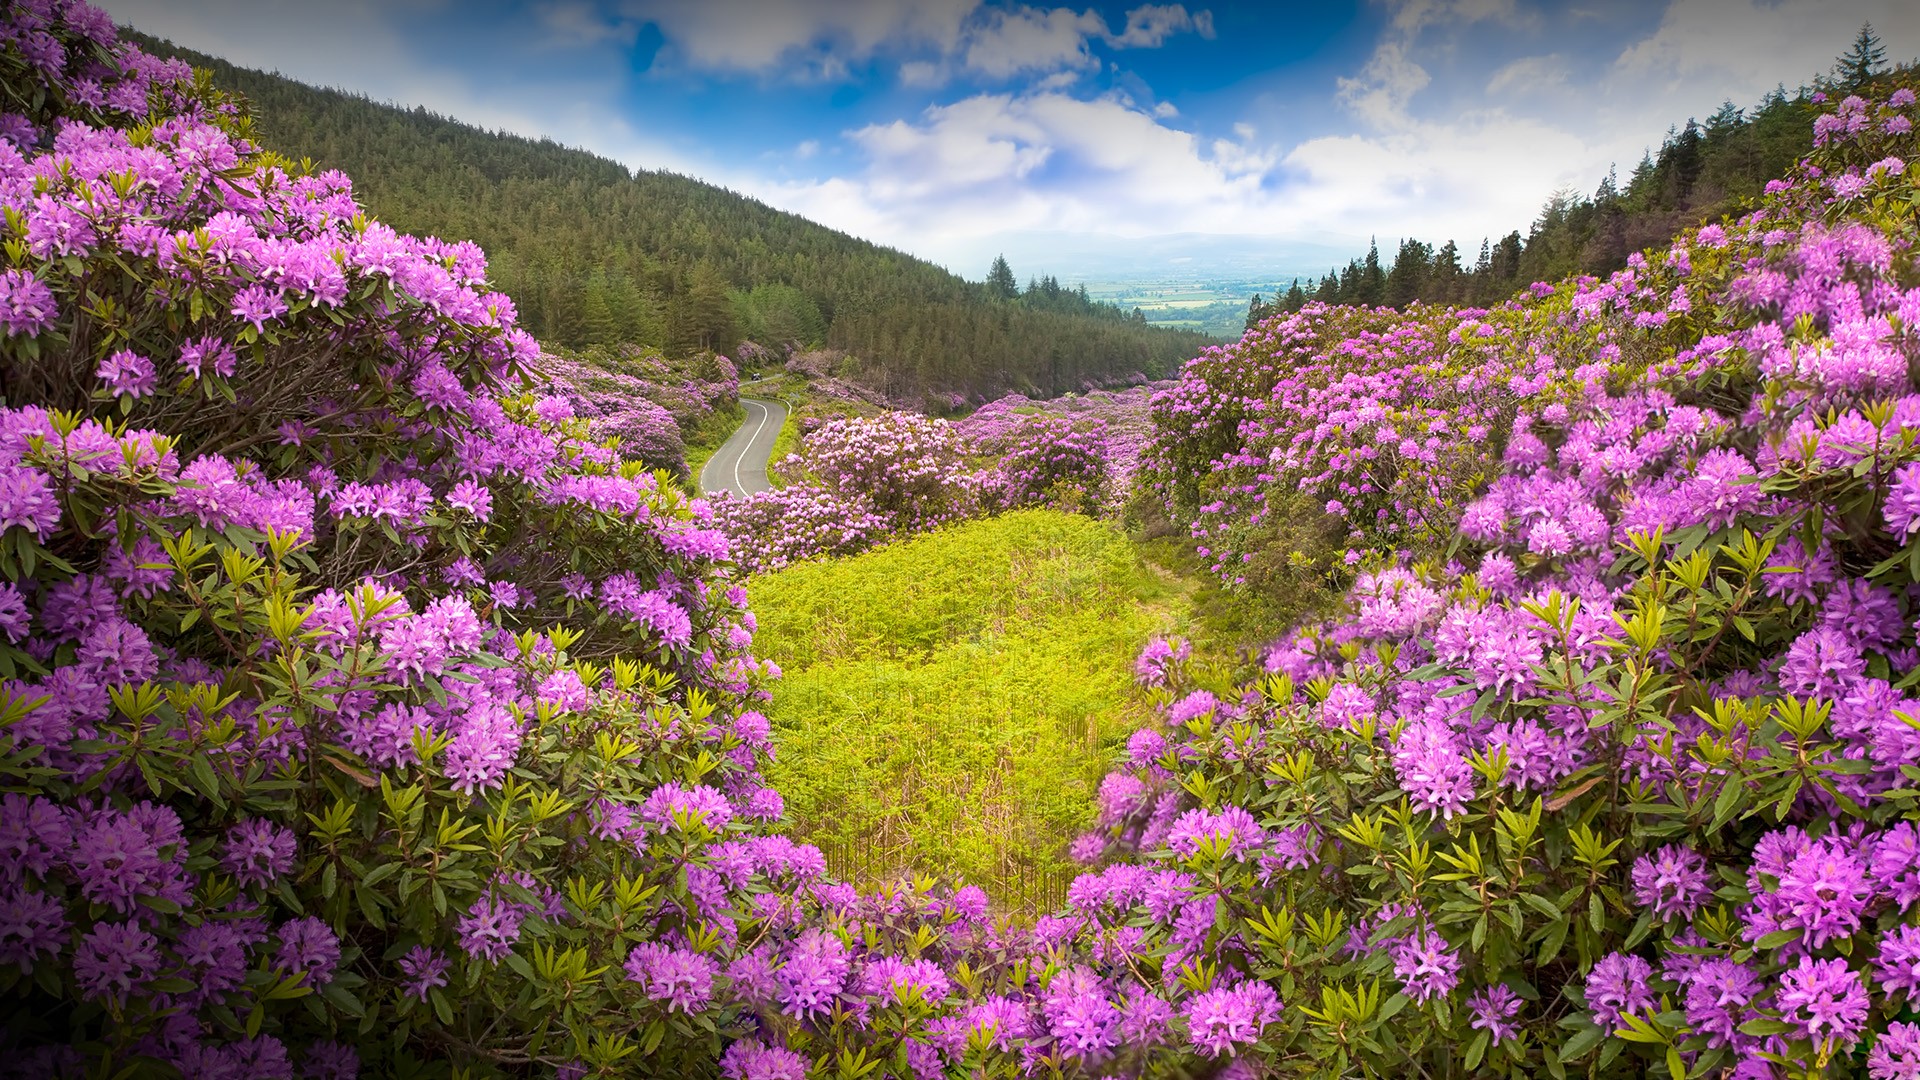 General 1920x1080 nature landscape flowers trees forest plants clouds sky road purple flowers Rhododendron Ireland